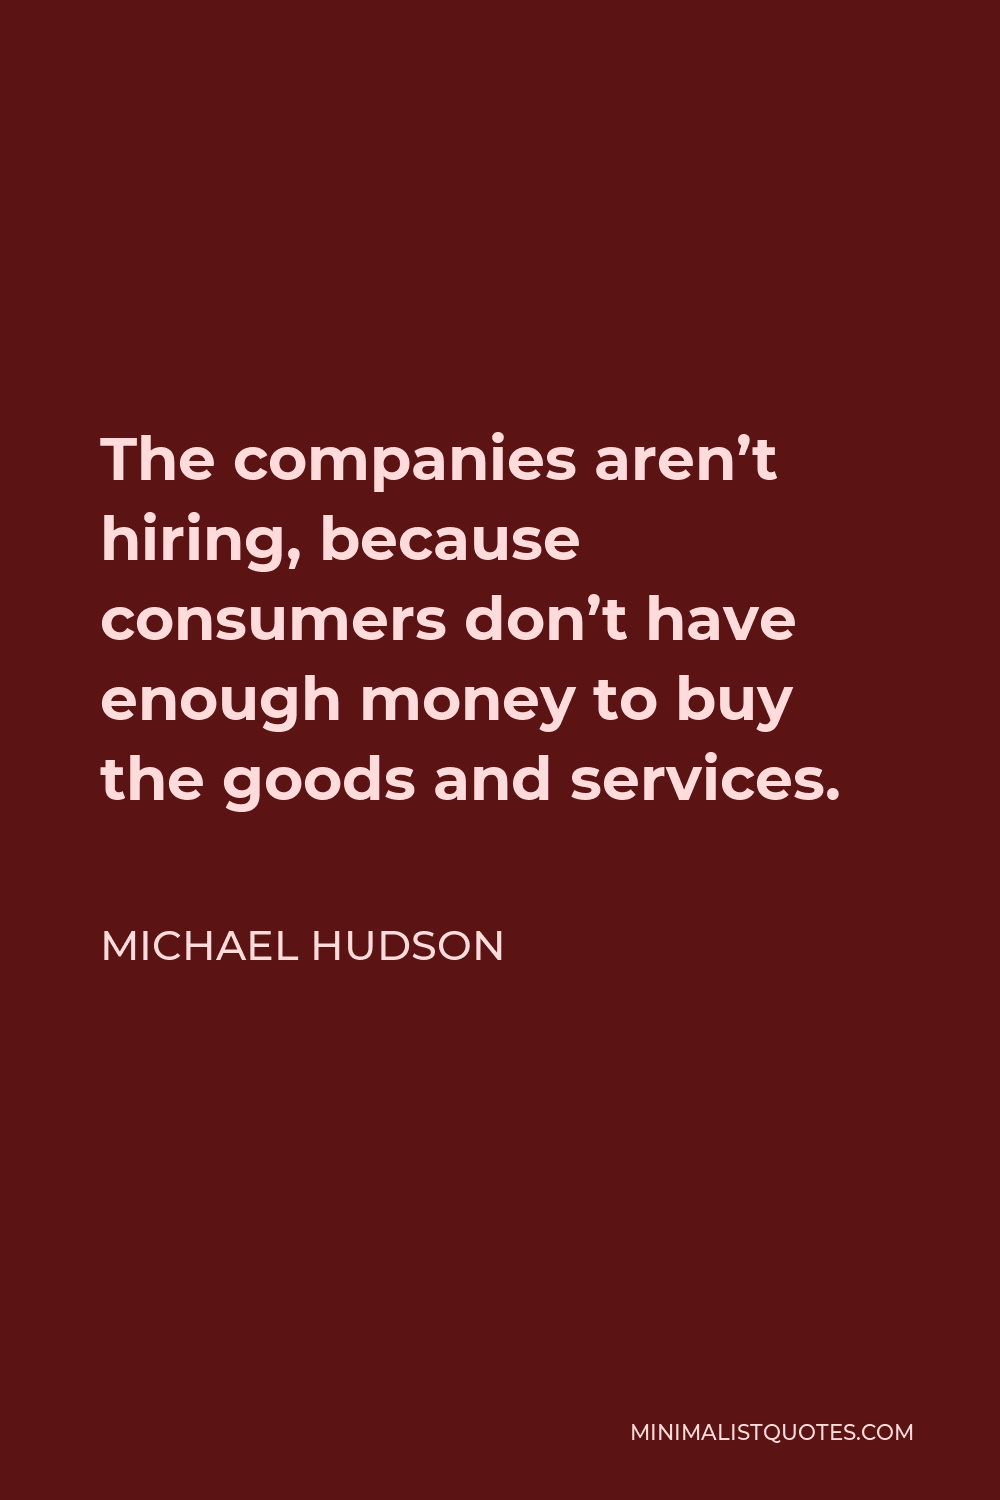 Michael Hudson Quote - The companies aren’t hiring, because consumers don’t have enough money to buy the goods and services.